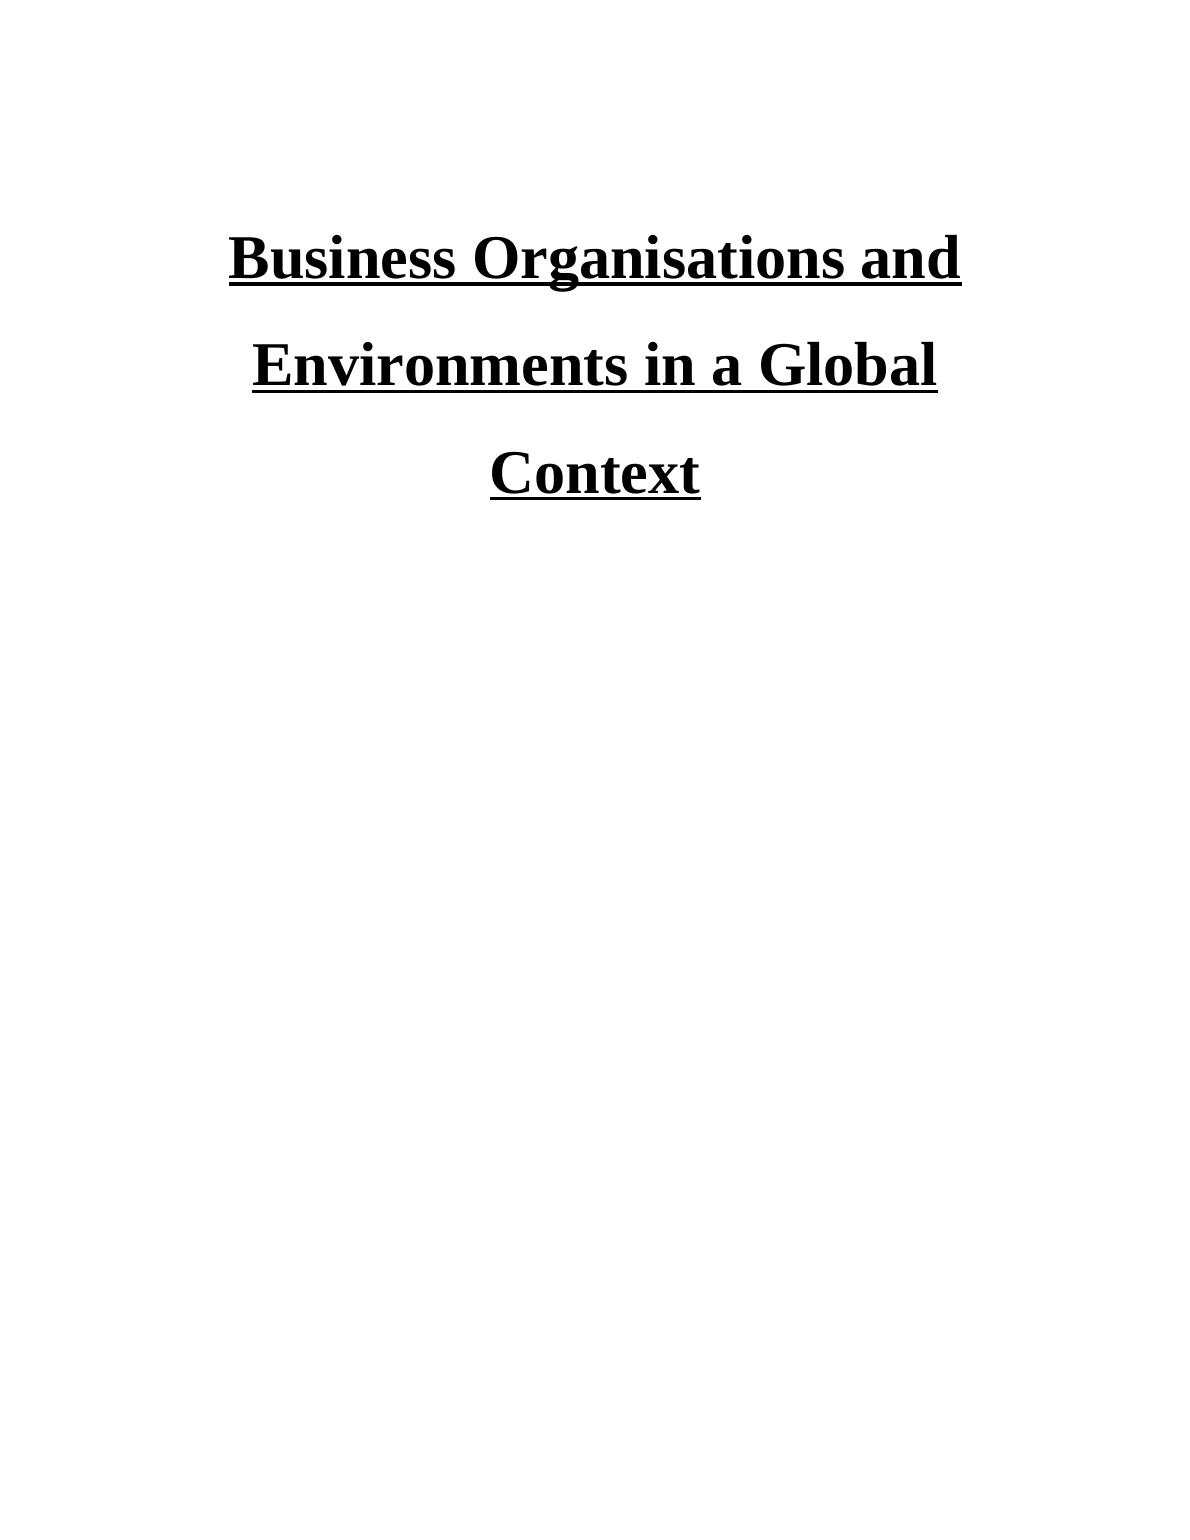 Business Organisations and Environments in a Global Context - Lidl_1